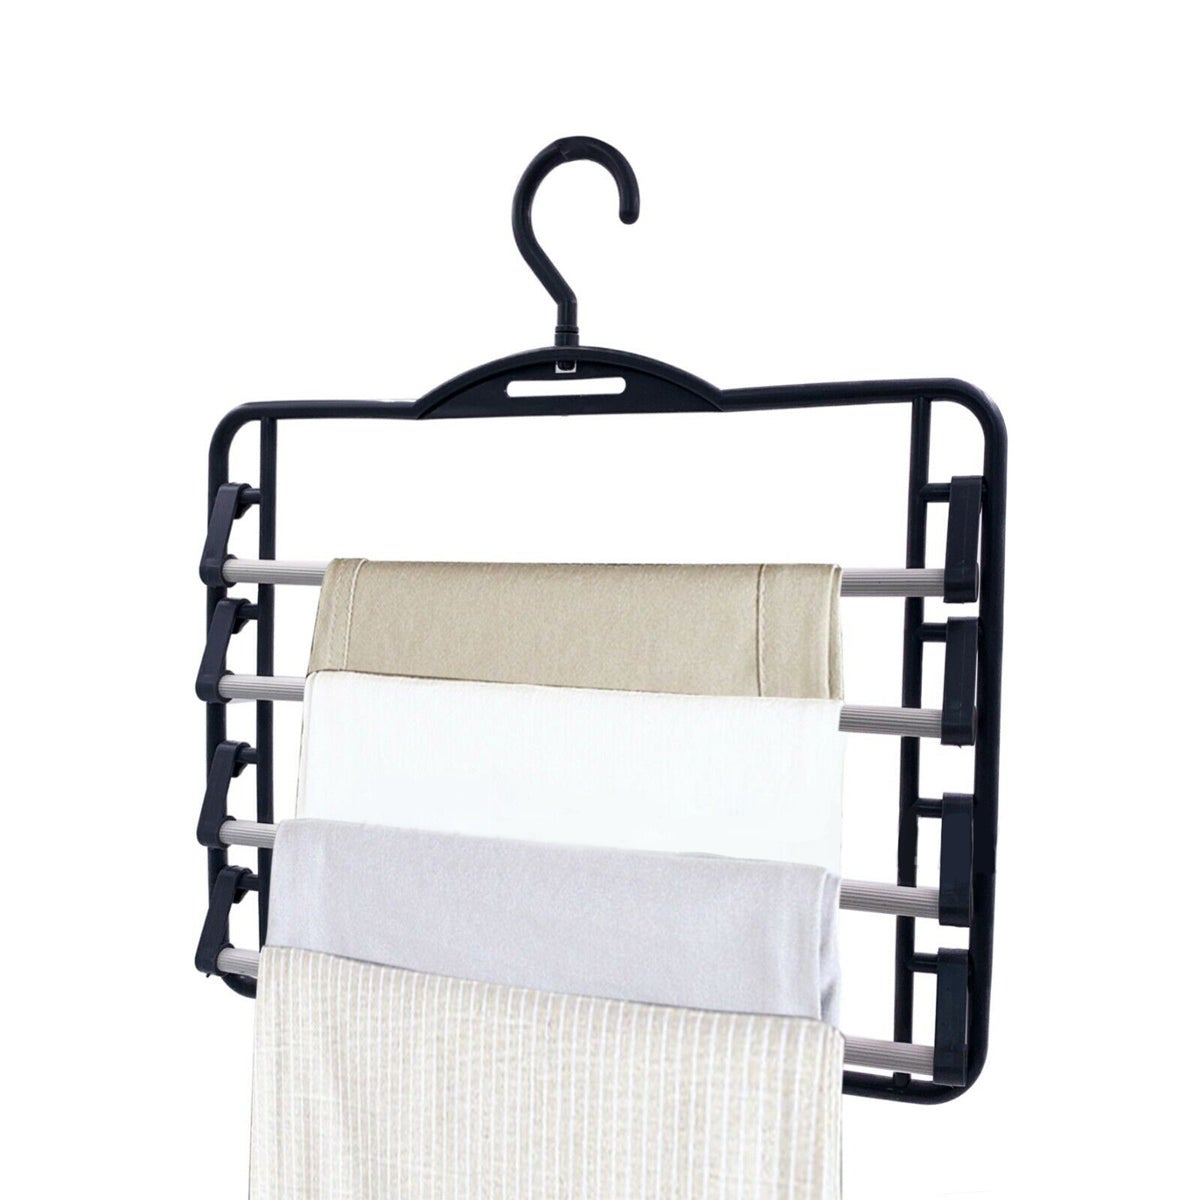 Volo Pull Out Pants Rack -Steel Pull Out Pants Hangers - Clothes Organiser  Storage Bar Pants Slide Out Rack Trousers Rack for Wardrobe Organization.  Colour: Mocha (Side Mounted Trouser Rack) : Amazon.in: